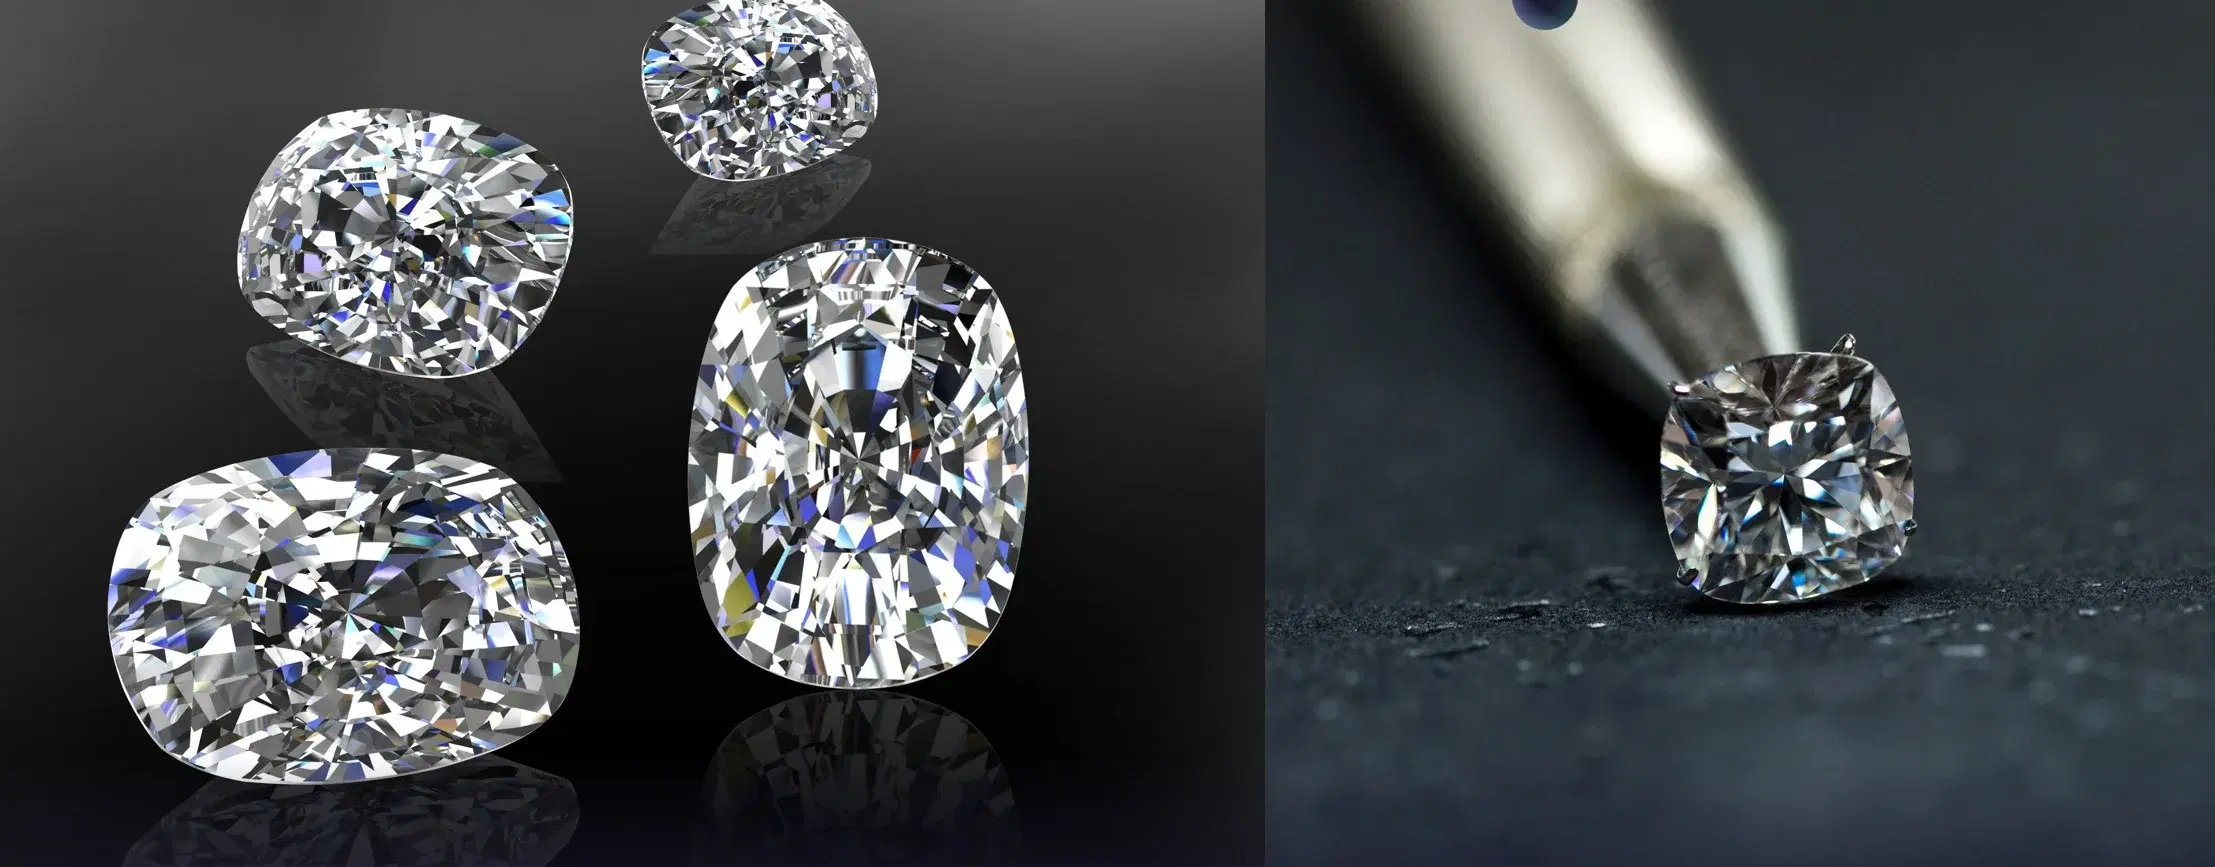 Buying Wholesale Diamonds Locally: Is it Possible?